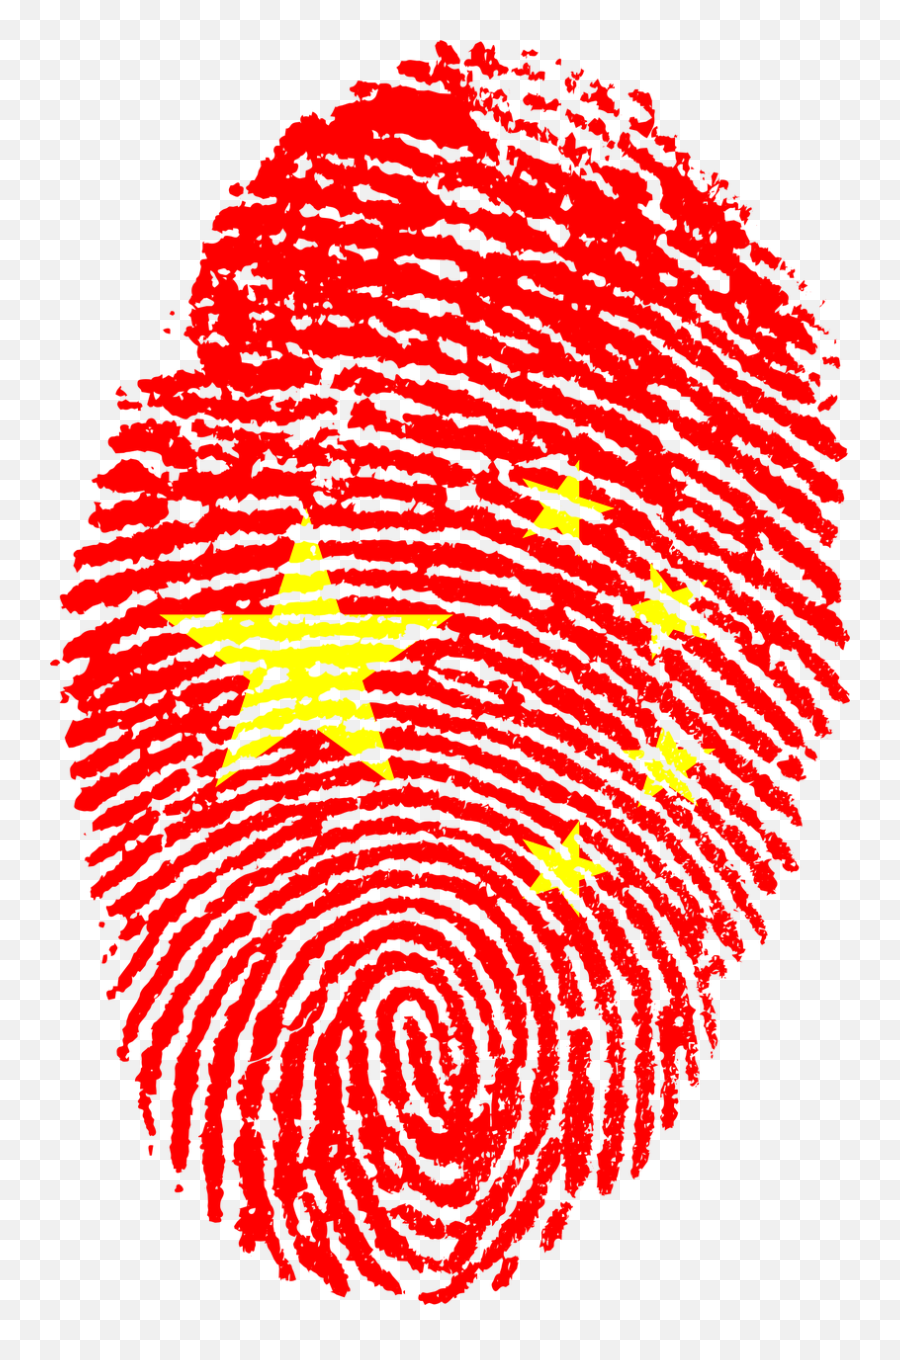 Opol Chinese - English The Importance Of Having A Support China Flag Fingerprint Emoji,Chinese Emotions